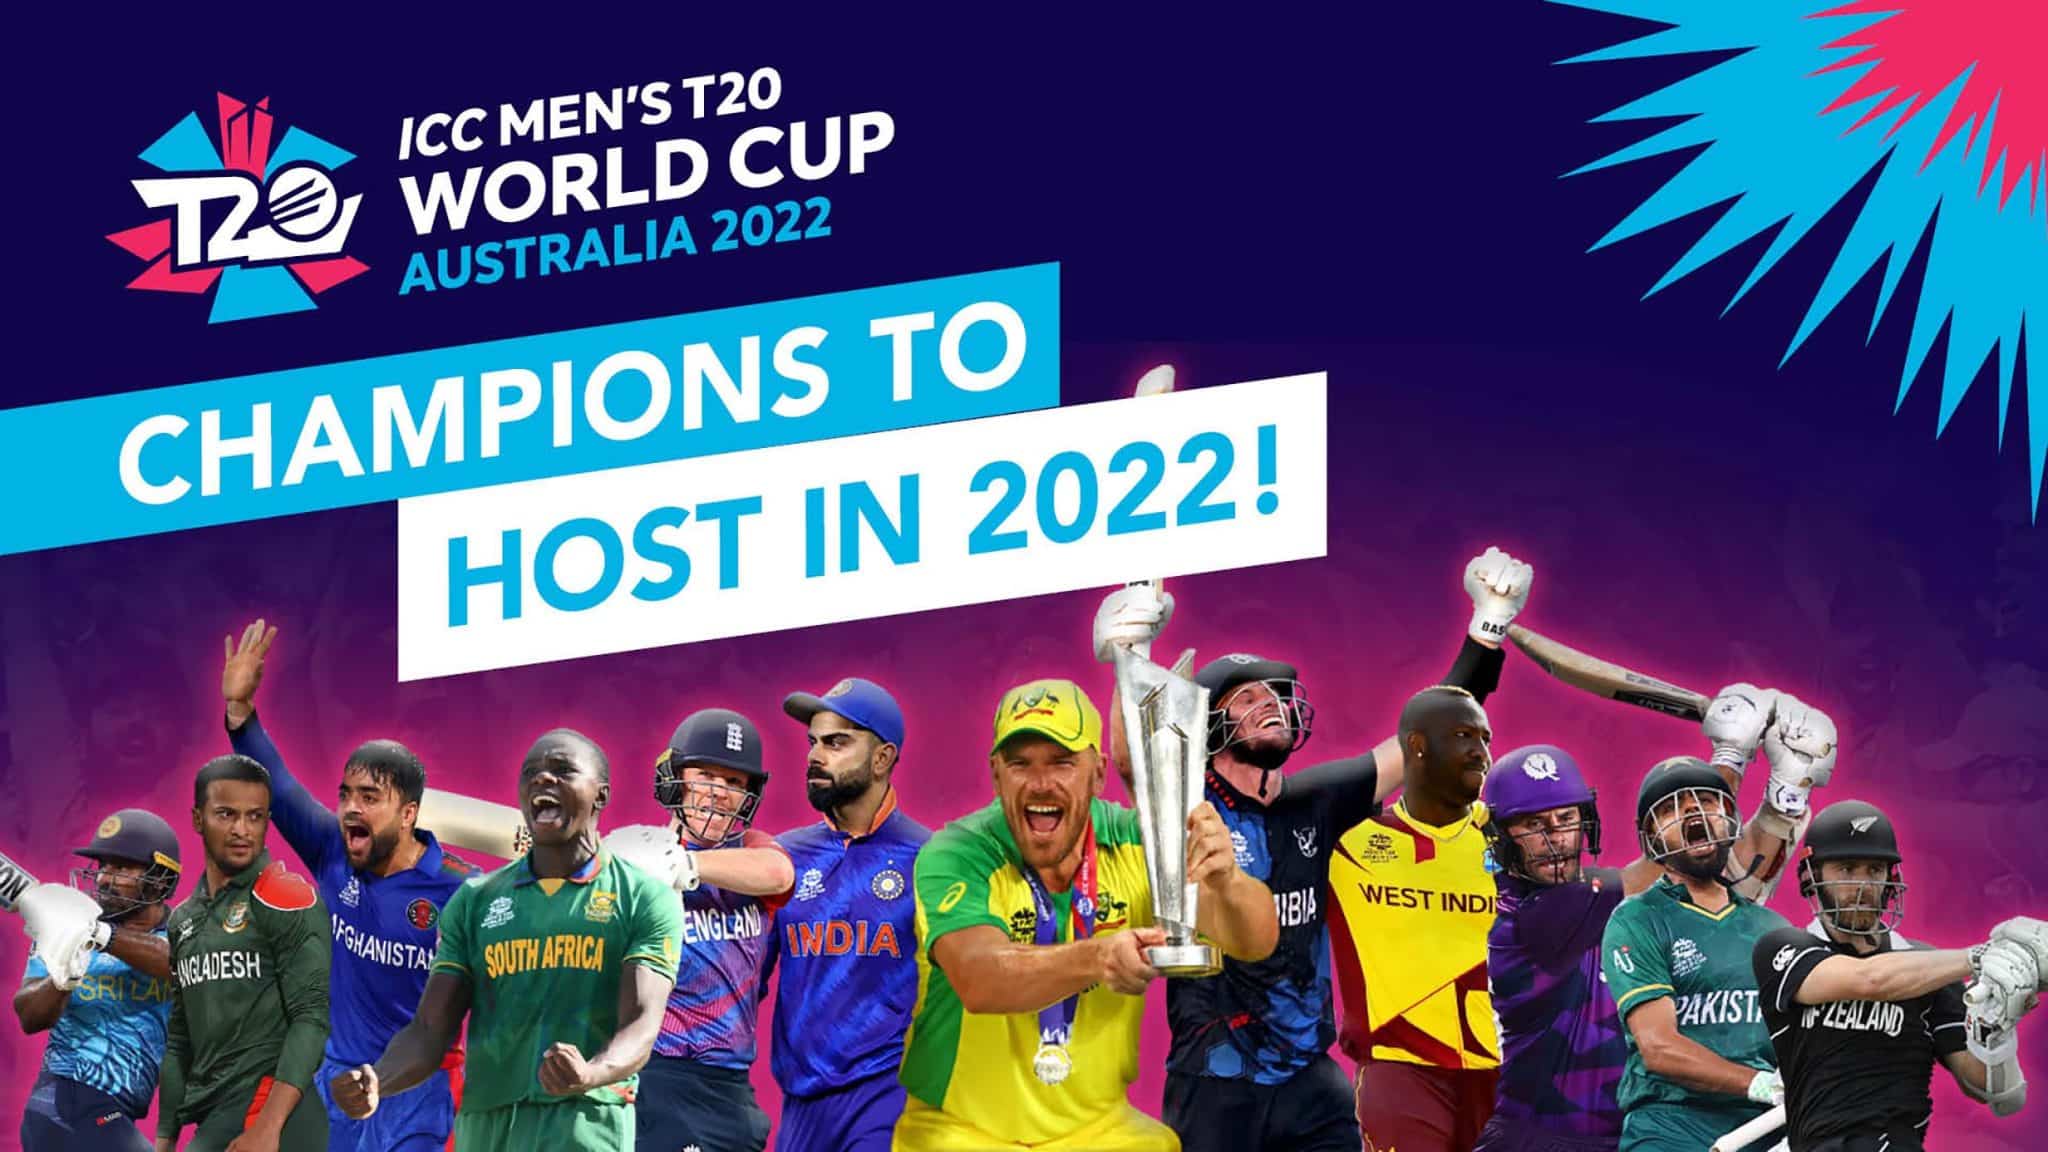 All you need to know about the ICC men’s T20 World Cup 2022